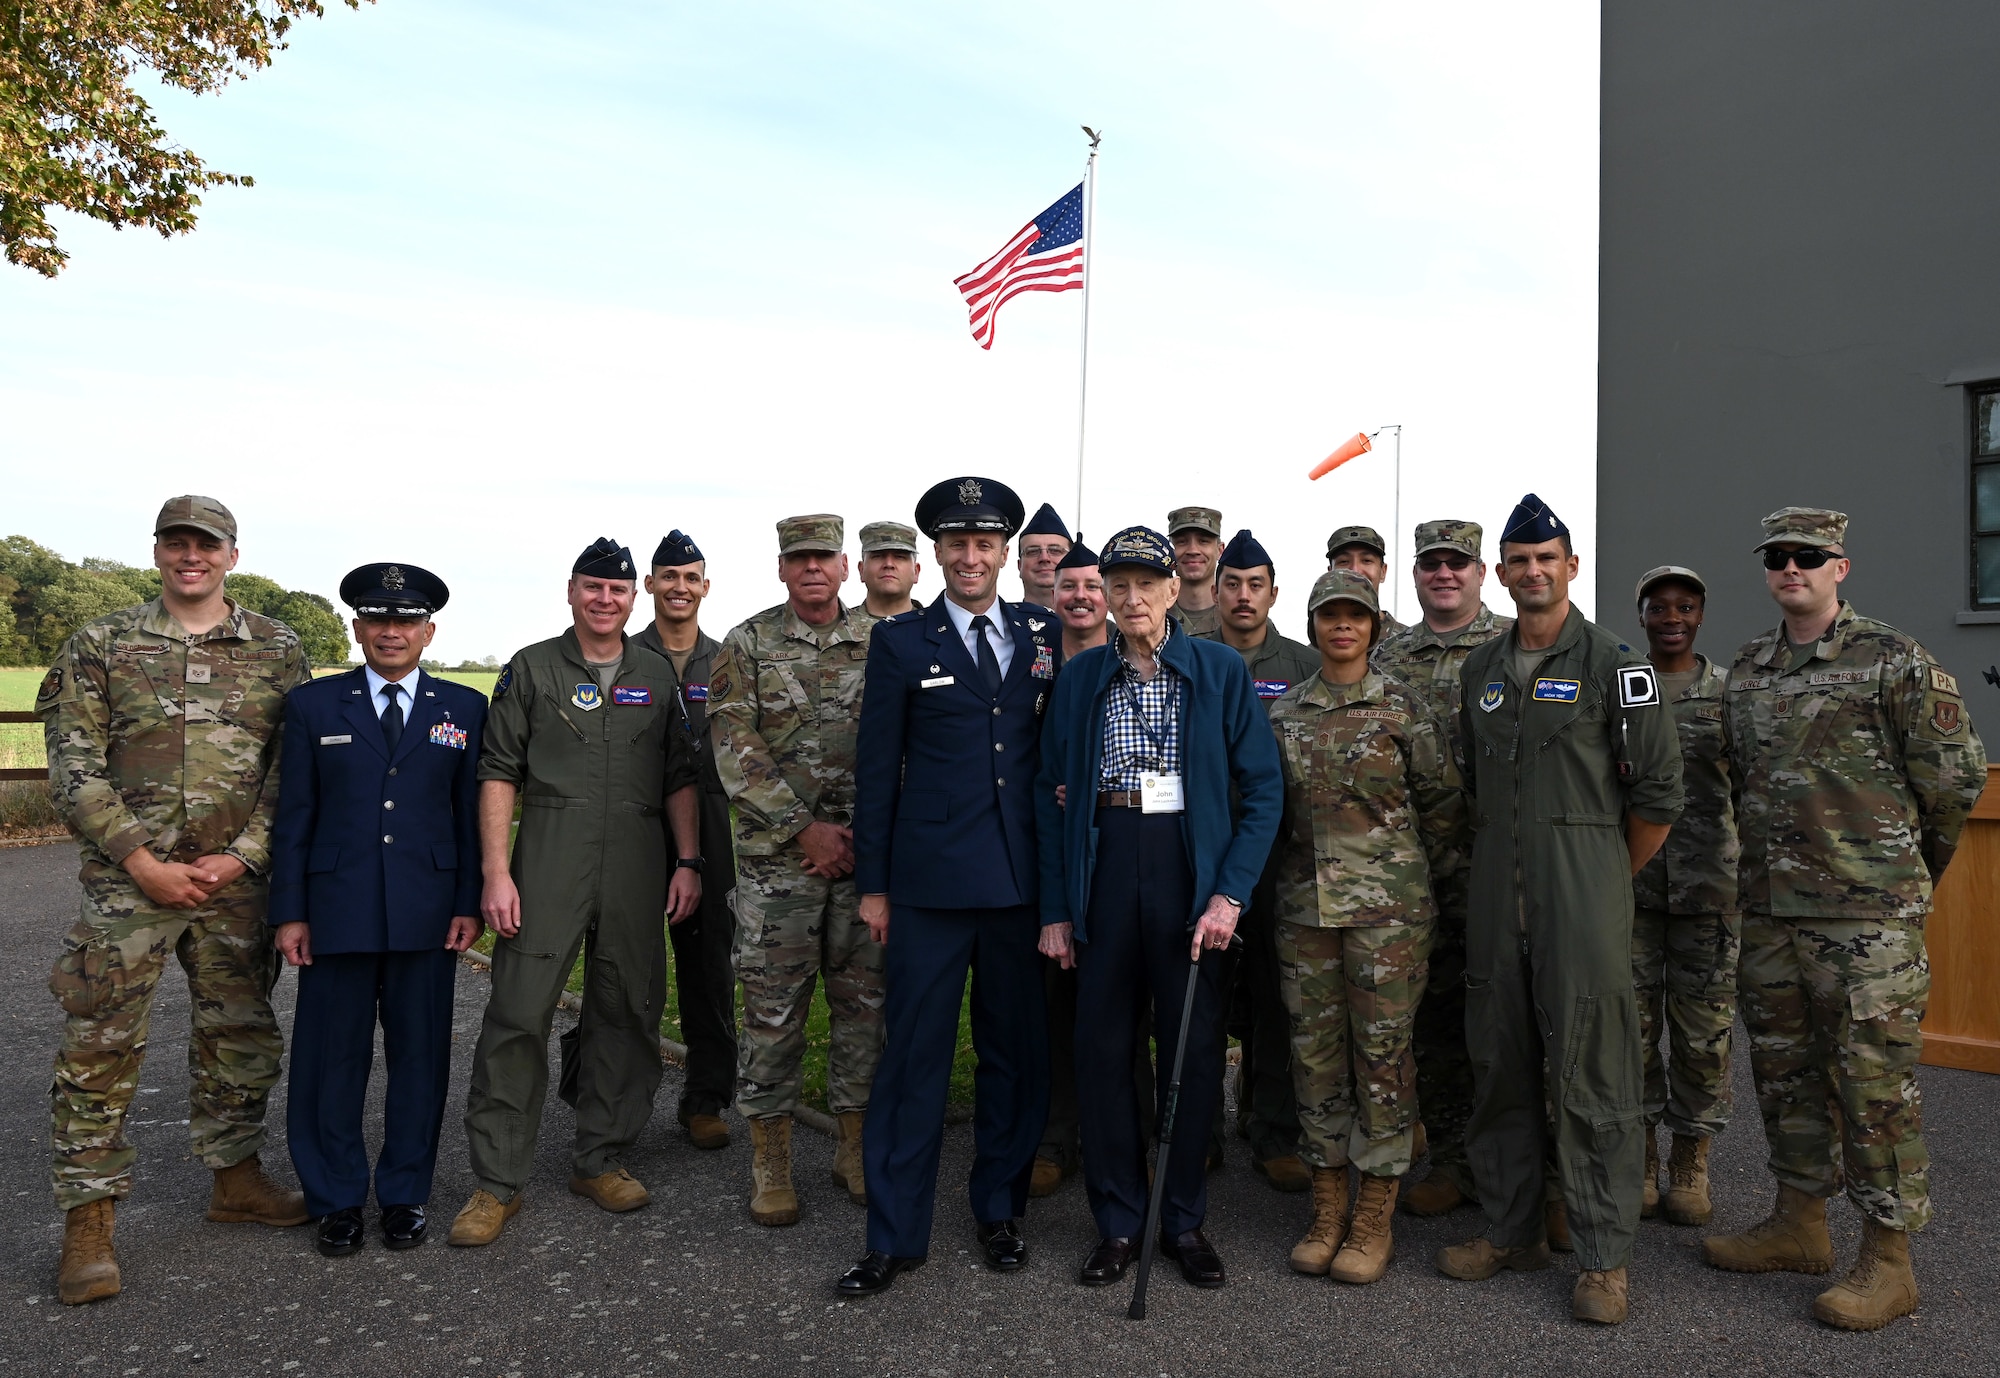 U.S. Air Force senior leaders and Airmen from the 100th Air Refueling Wing, Royal Air Force Mildenhall, are all smiles as they proudly pose for a photo with legendary World War II veteran and 100th Bomb Group B-17 pilot, retired-Maj. John “Lucky” Luckadoo, after a ceremony honoring the 80th anniversary of “Black Week” at the 100th BG Memorial Museum, Thorpe Abbotts, Norfolk, England, Oct. 10, 2023. Lucky flew 25 combat missions out of Thorpe Abbotts during World War II – the average being eight to 12 – and achieved his dream of returning to his former base in England to once again visit the control tower, buildings and original airfield, museum volunteers, Airmen from the 100th ARW and family members of other 100th BG veterans (U.S. Air Force photo by Karen Abeyasekere)